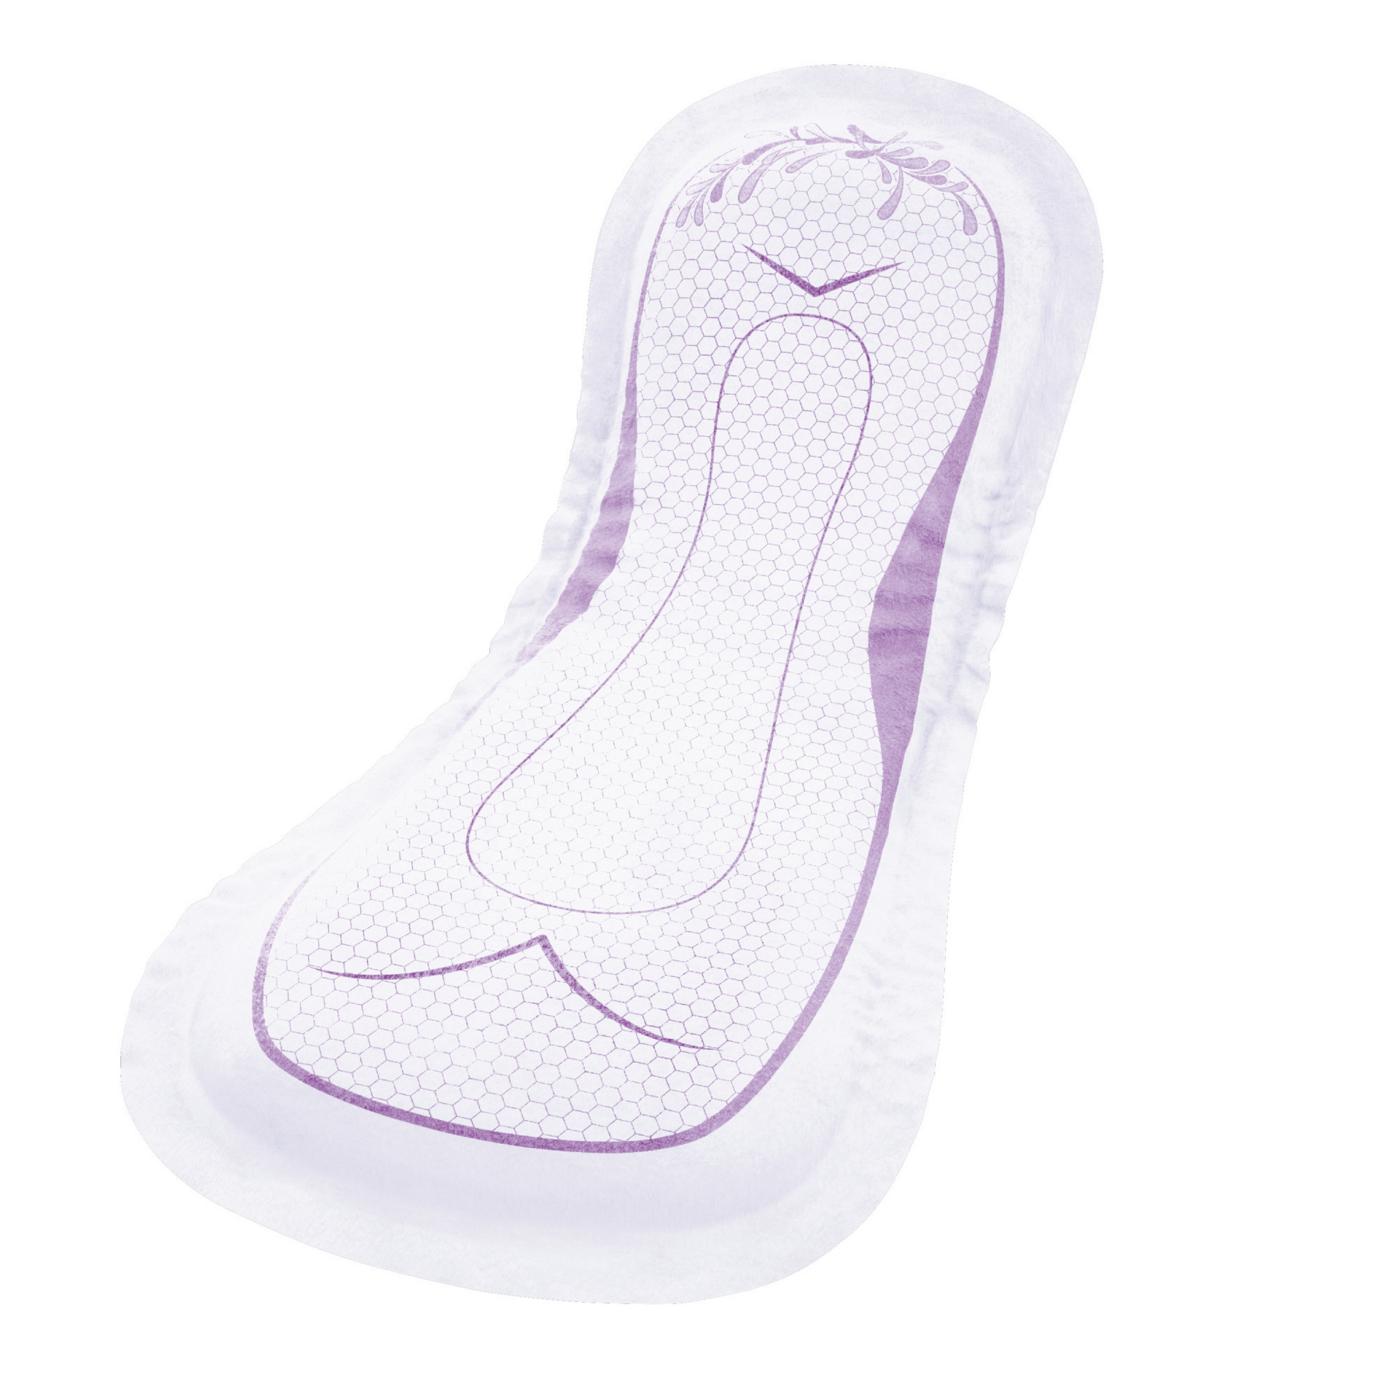 Tena Sensitive Care Extra Coverage Overnight Incontinence Pads; image 8 of 9